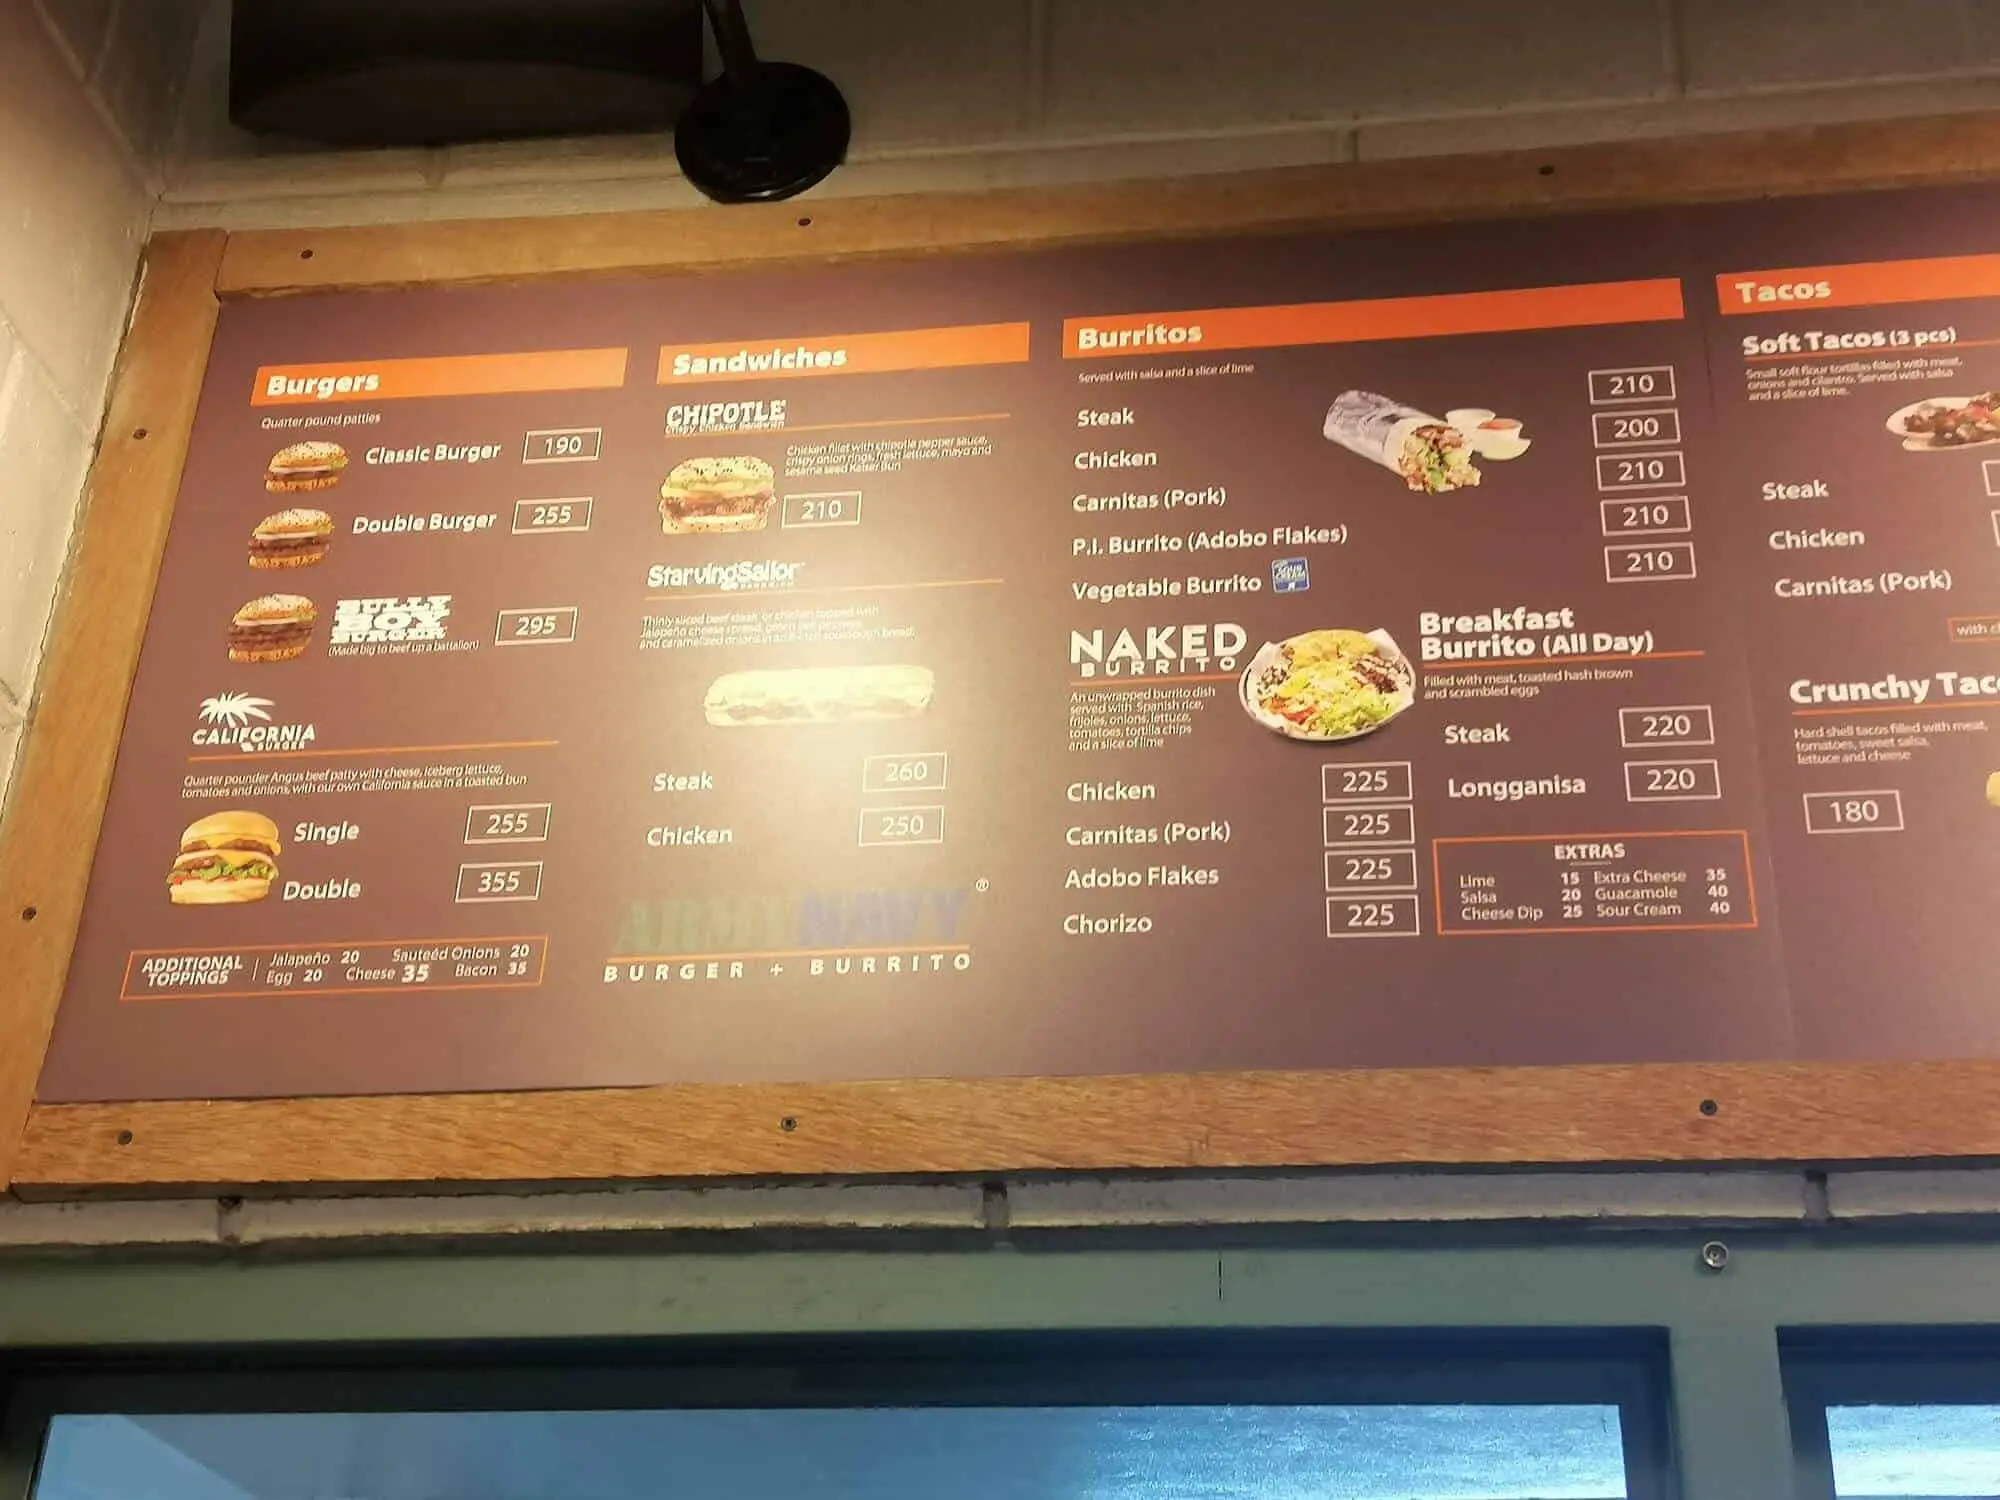 Menu At Army Navy Showing Burgers, Sandwiches, And Burritos